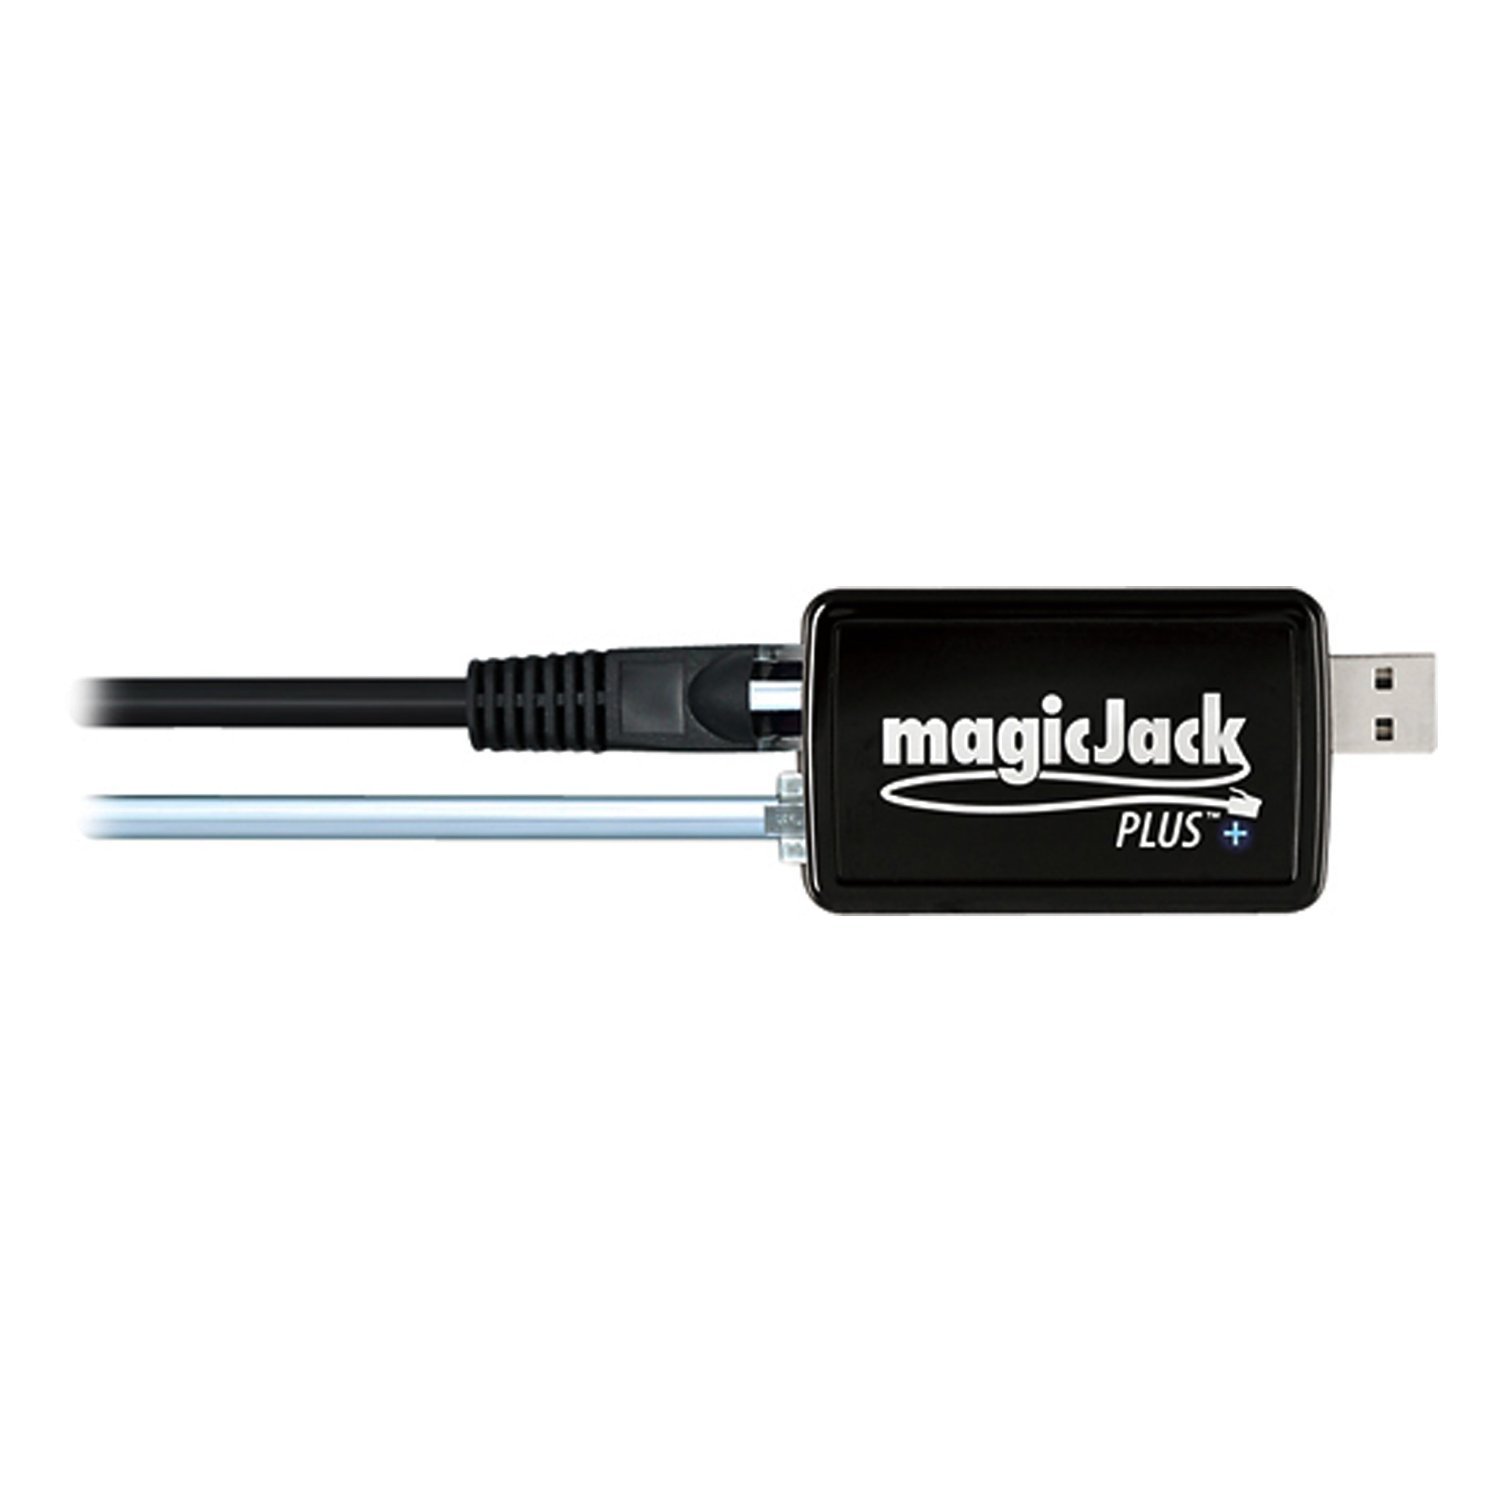 How To Connect Magicjack Without Pc